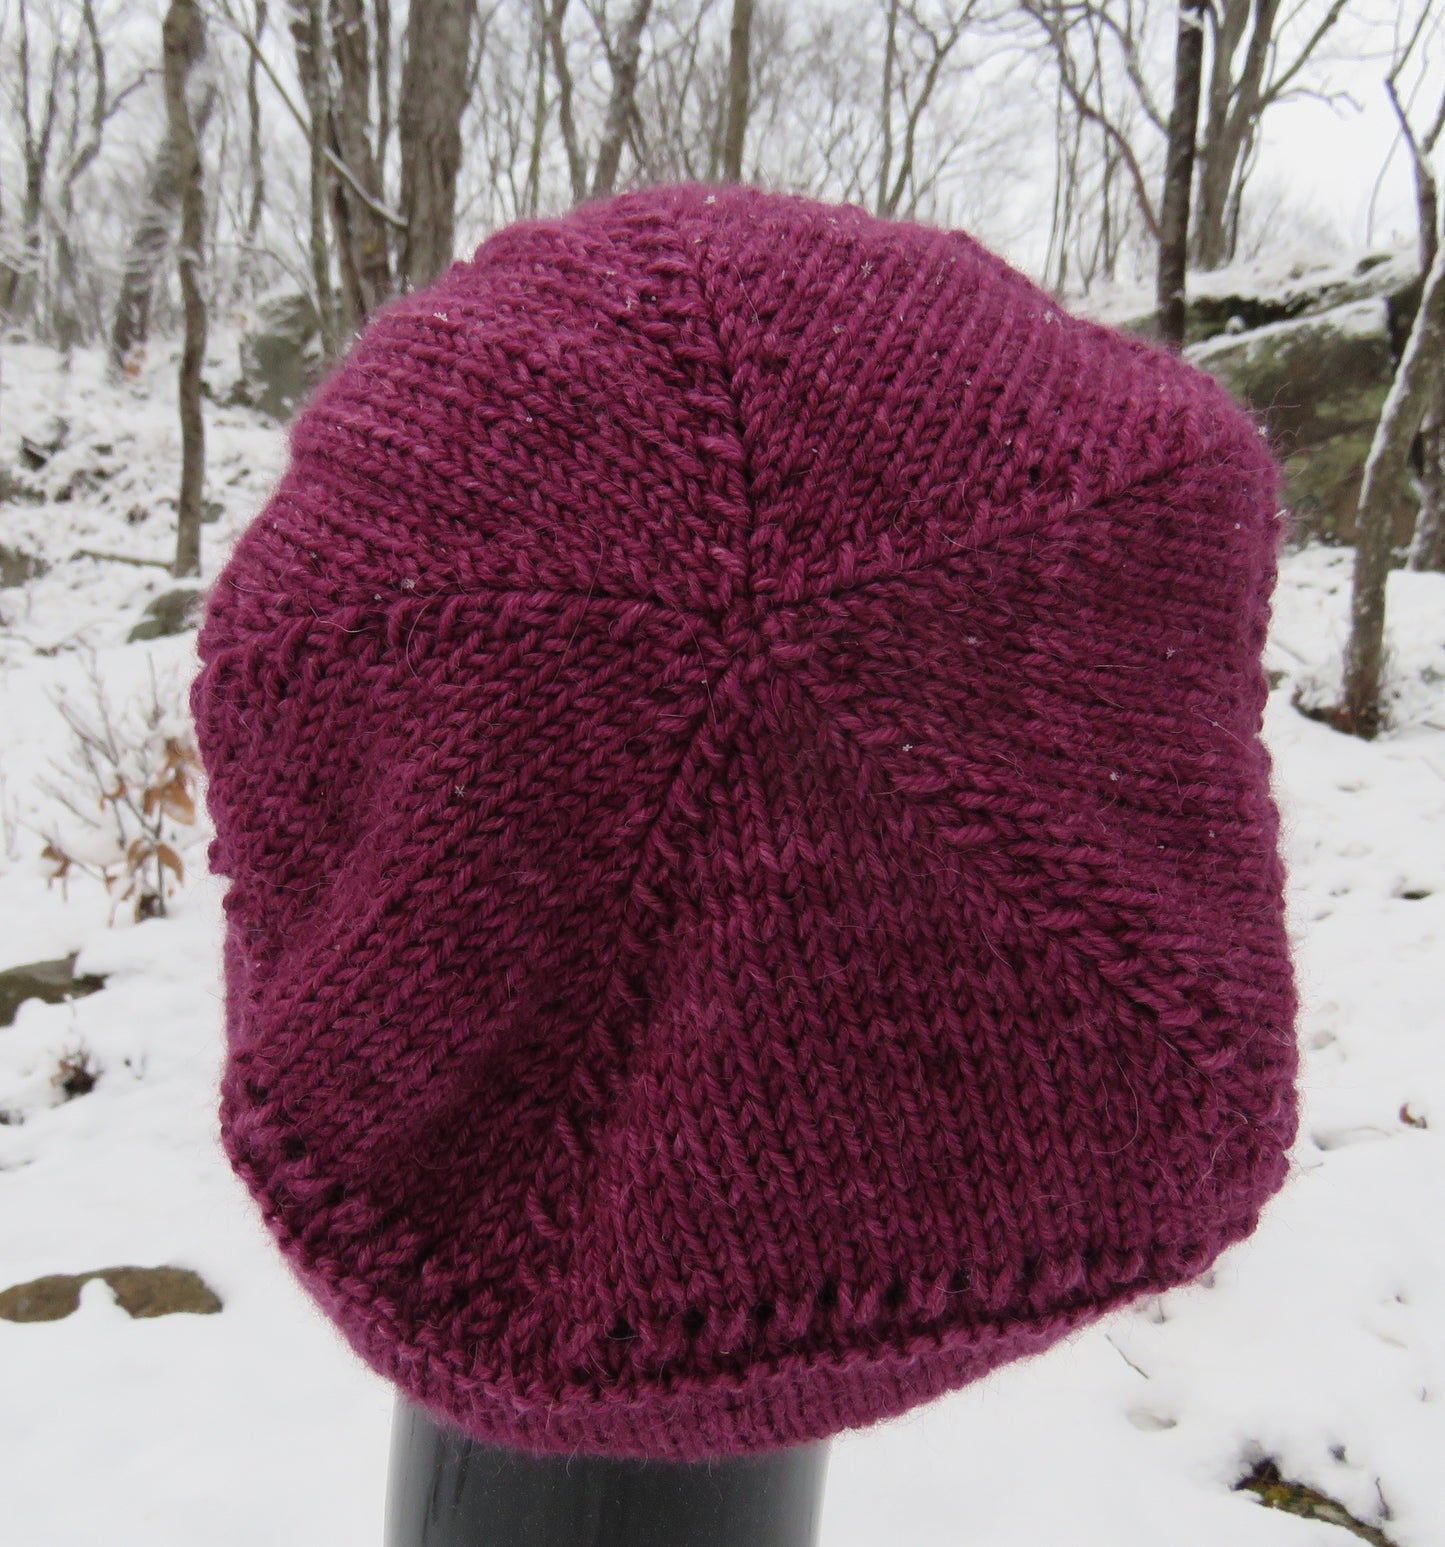 HAT - Cable Brim Hat in Wine BAMS 23